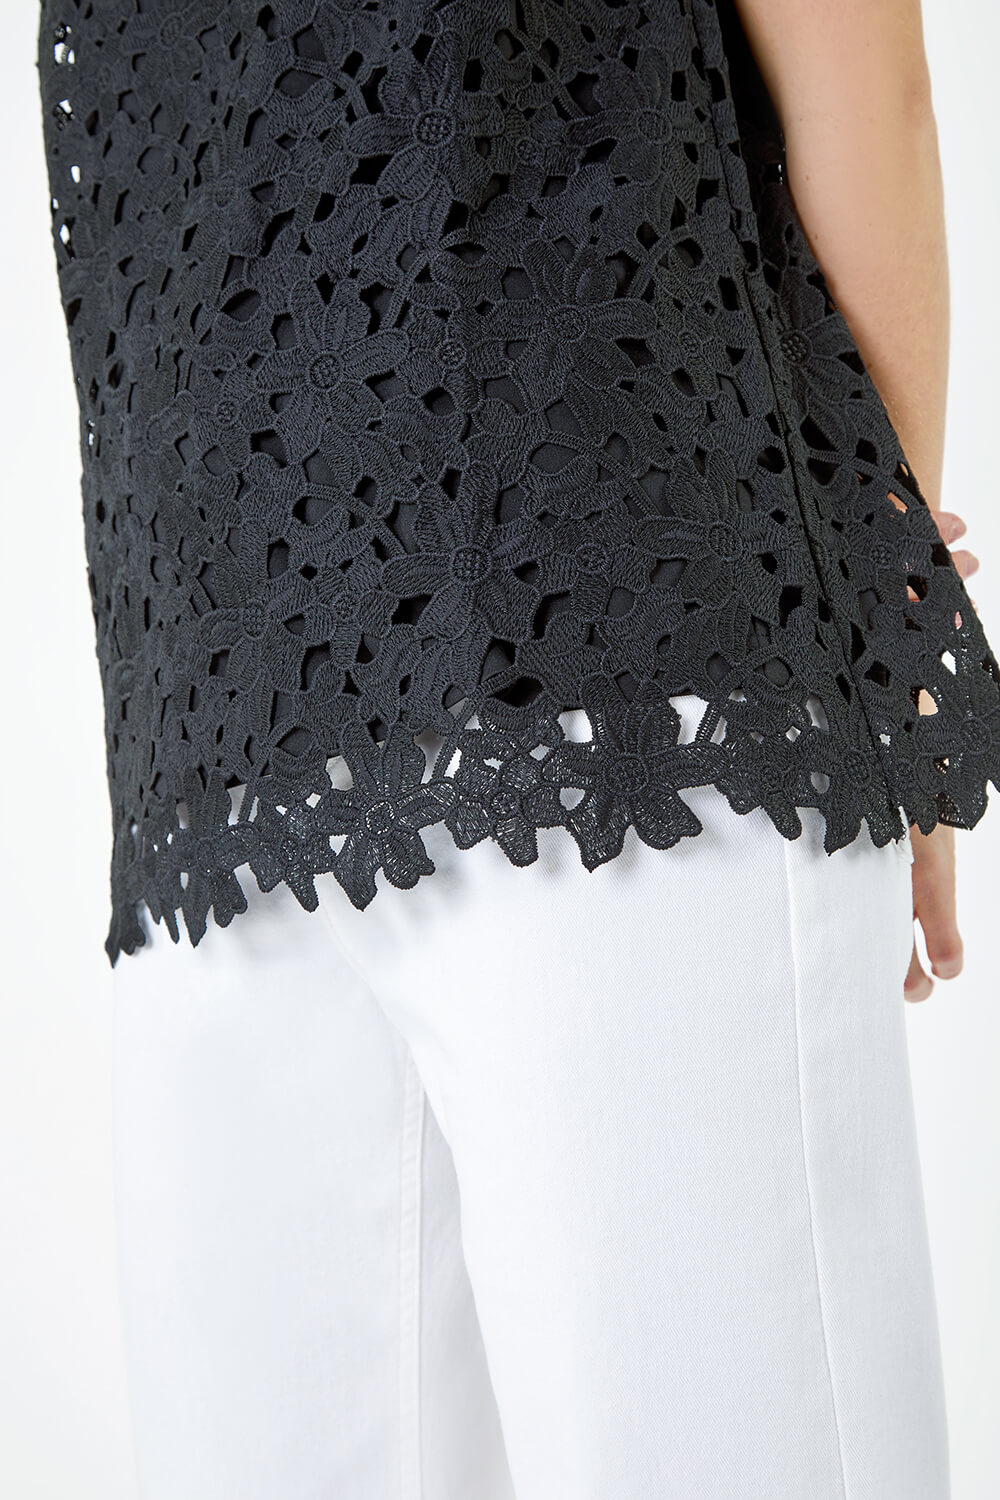 Black Ladder Trim Lace Jersey Top, Image 5 of 5